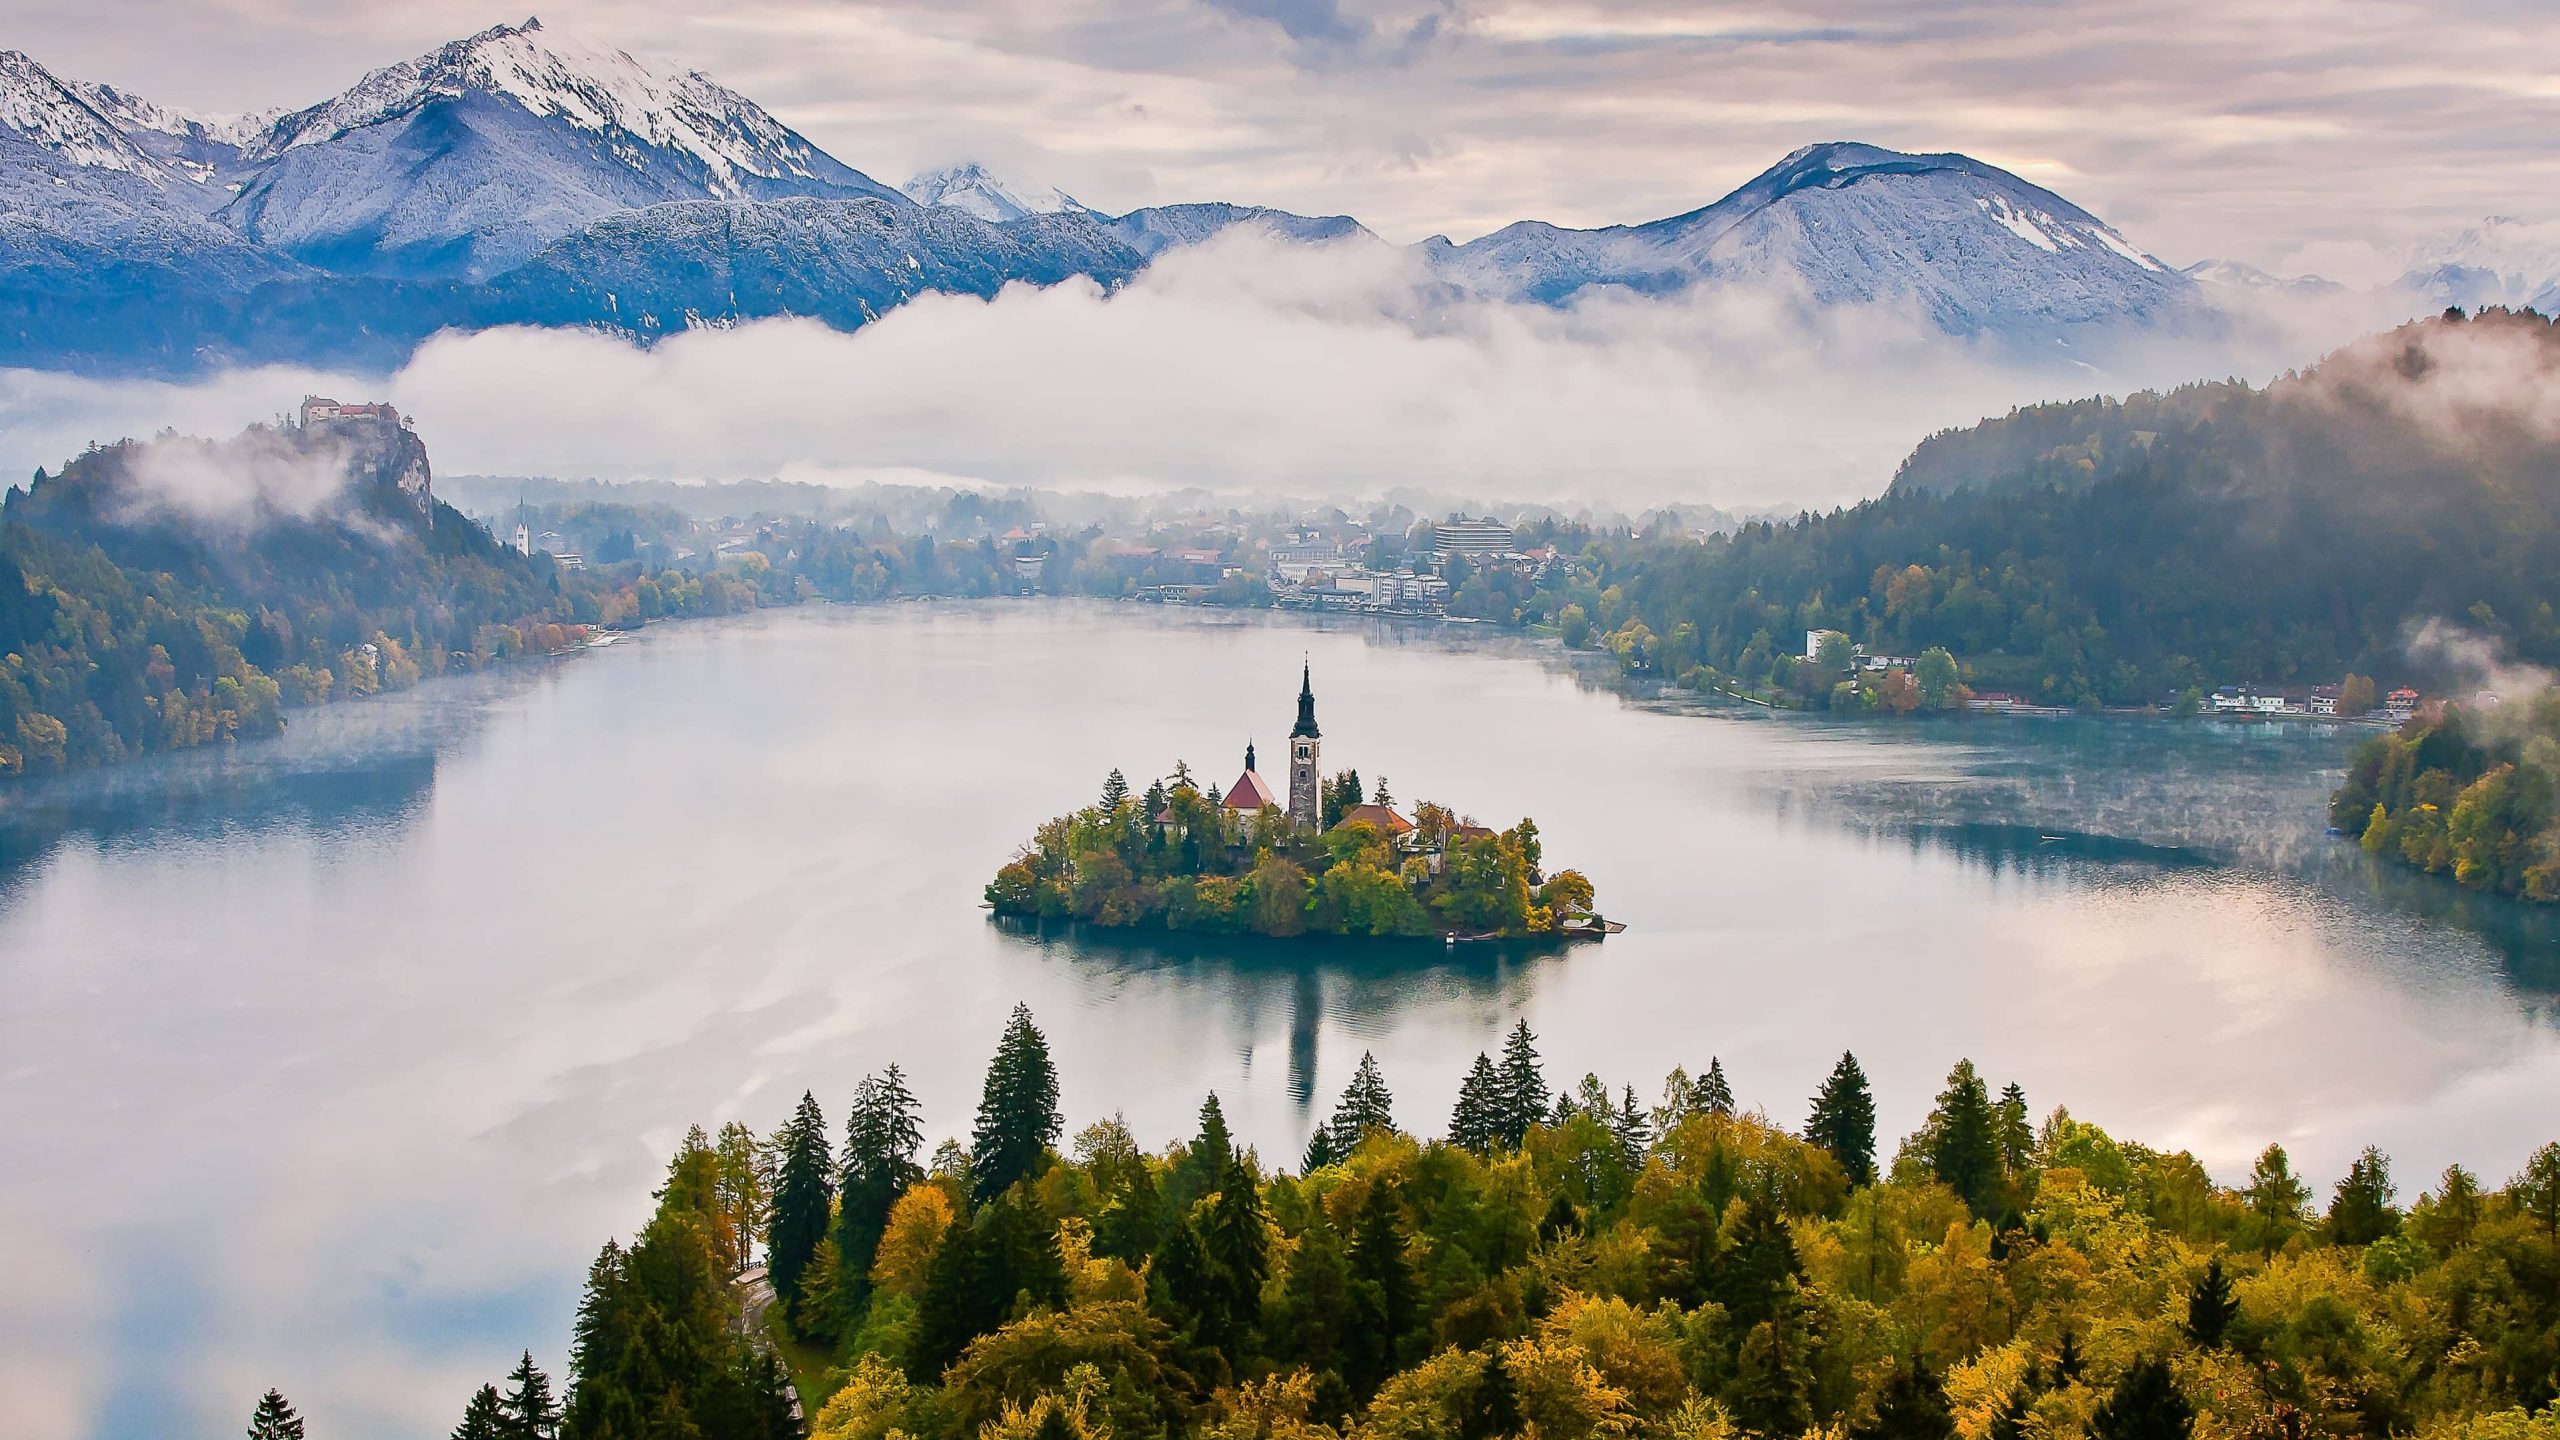 Island in the middle of the lake in Bled, Slovenia